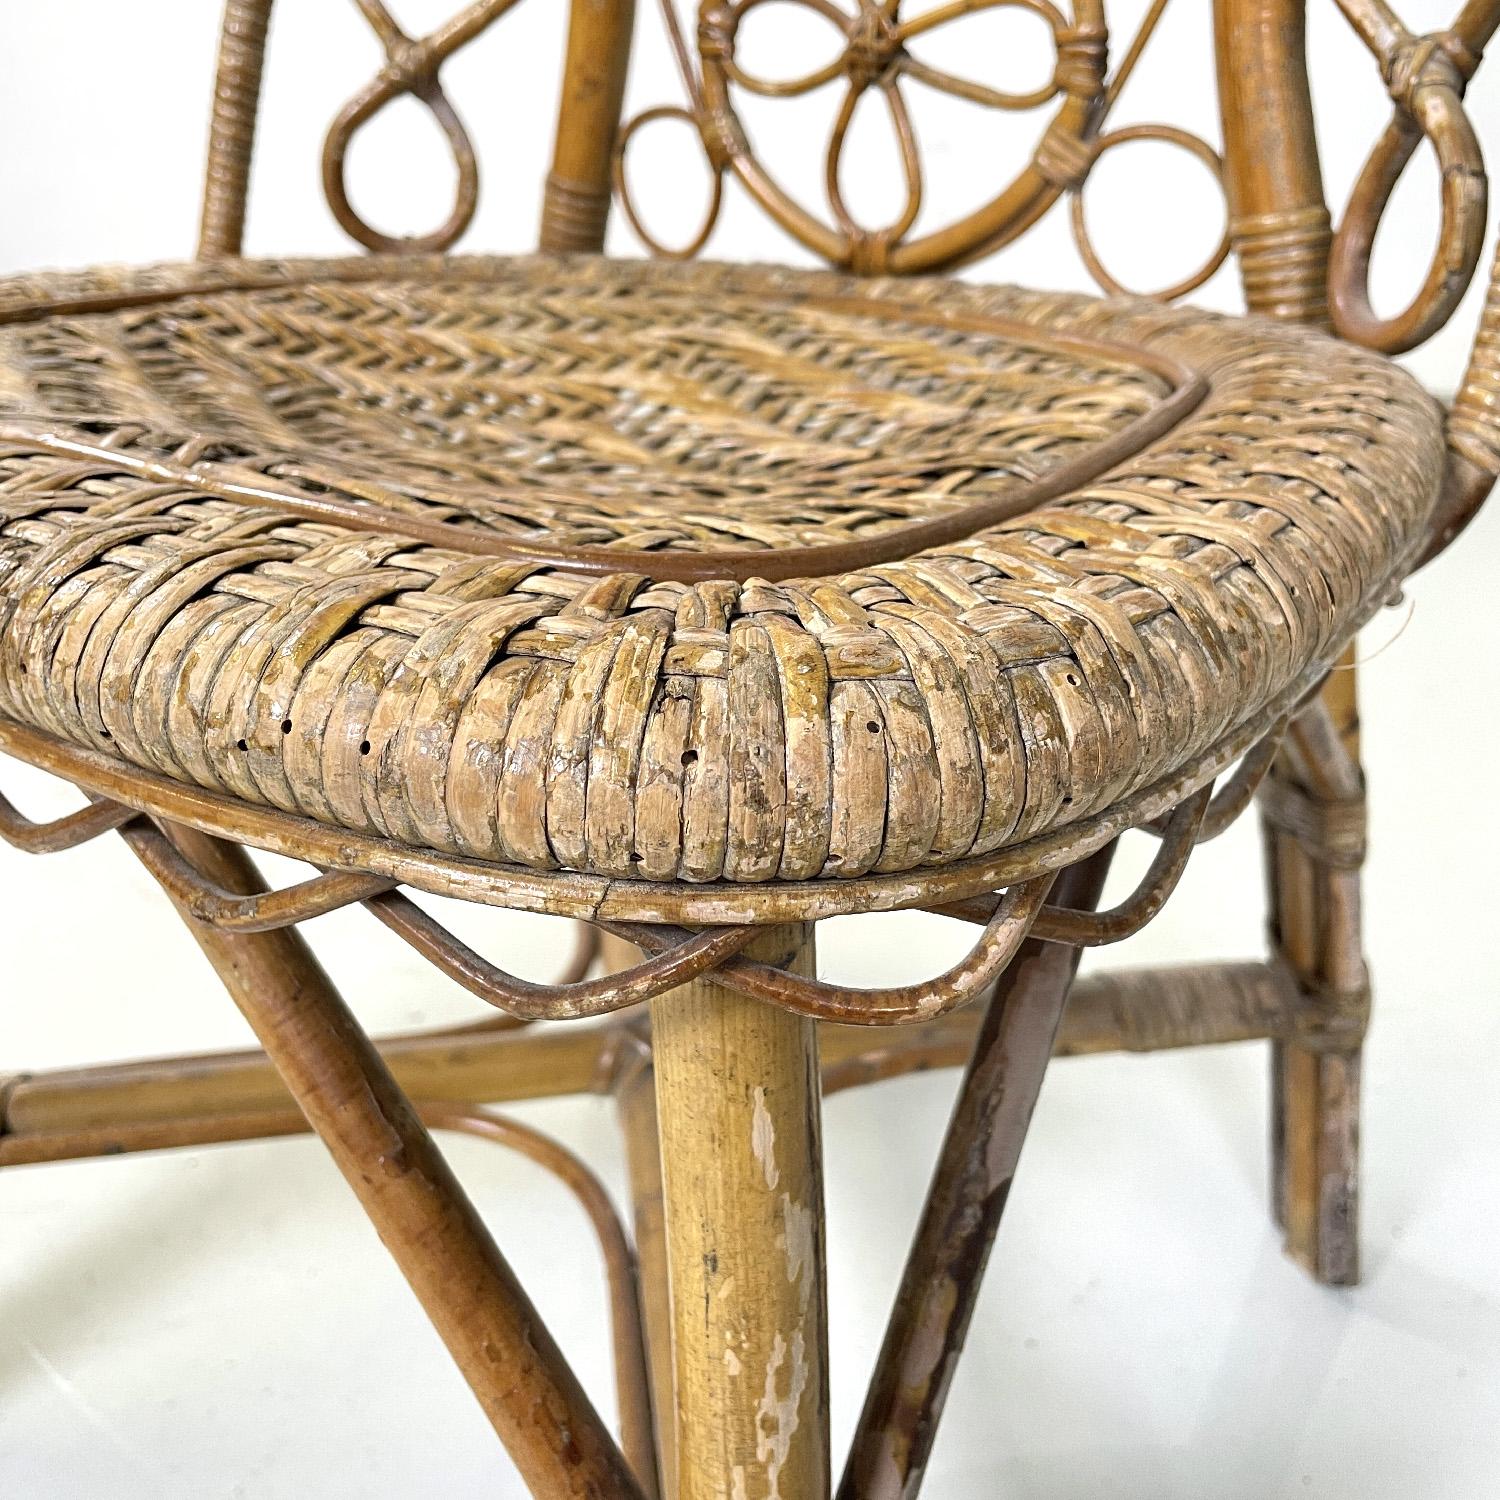 Italian antique rattan chair with floral and geometric decoration, early 1900s For Sale 7